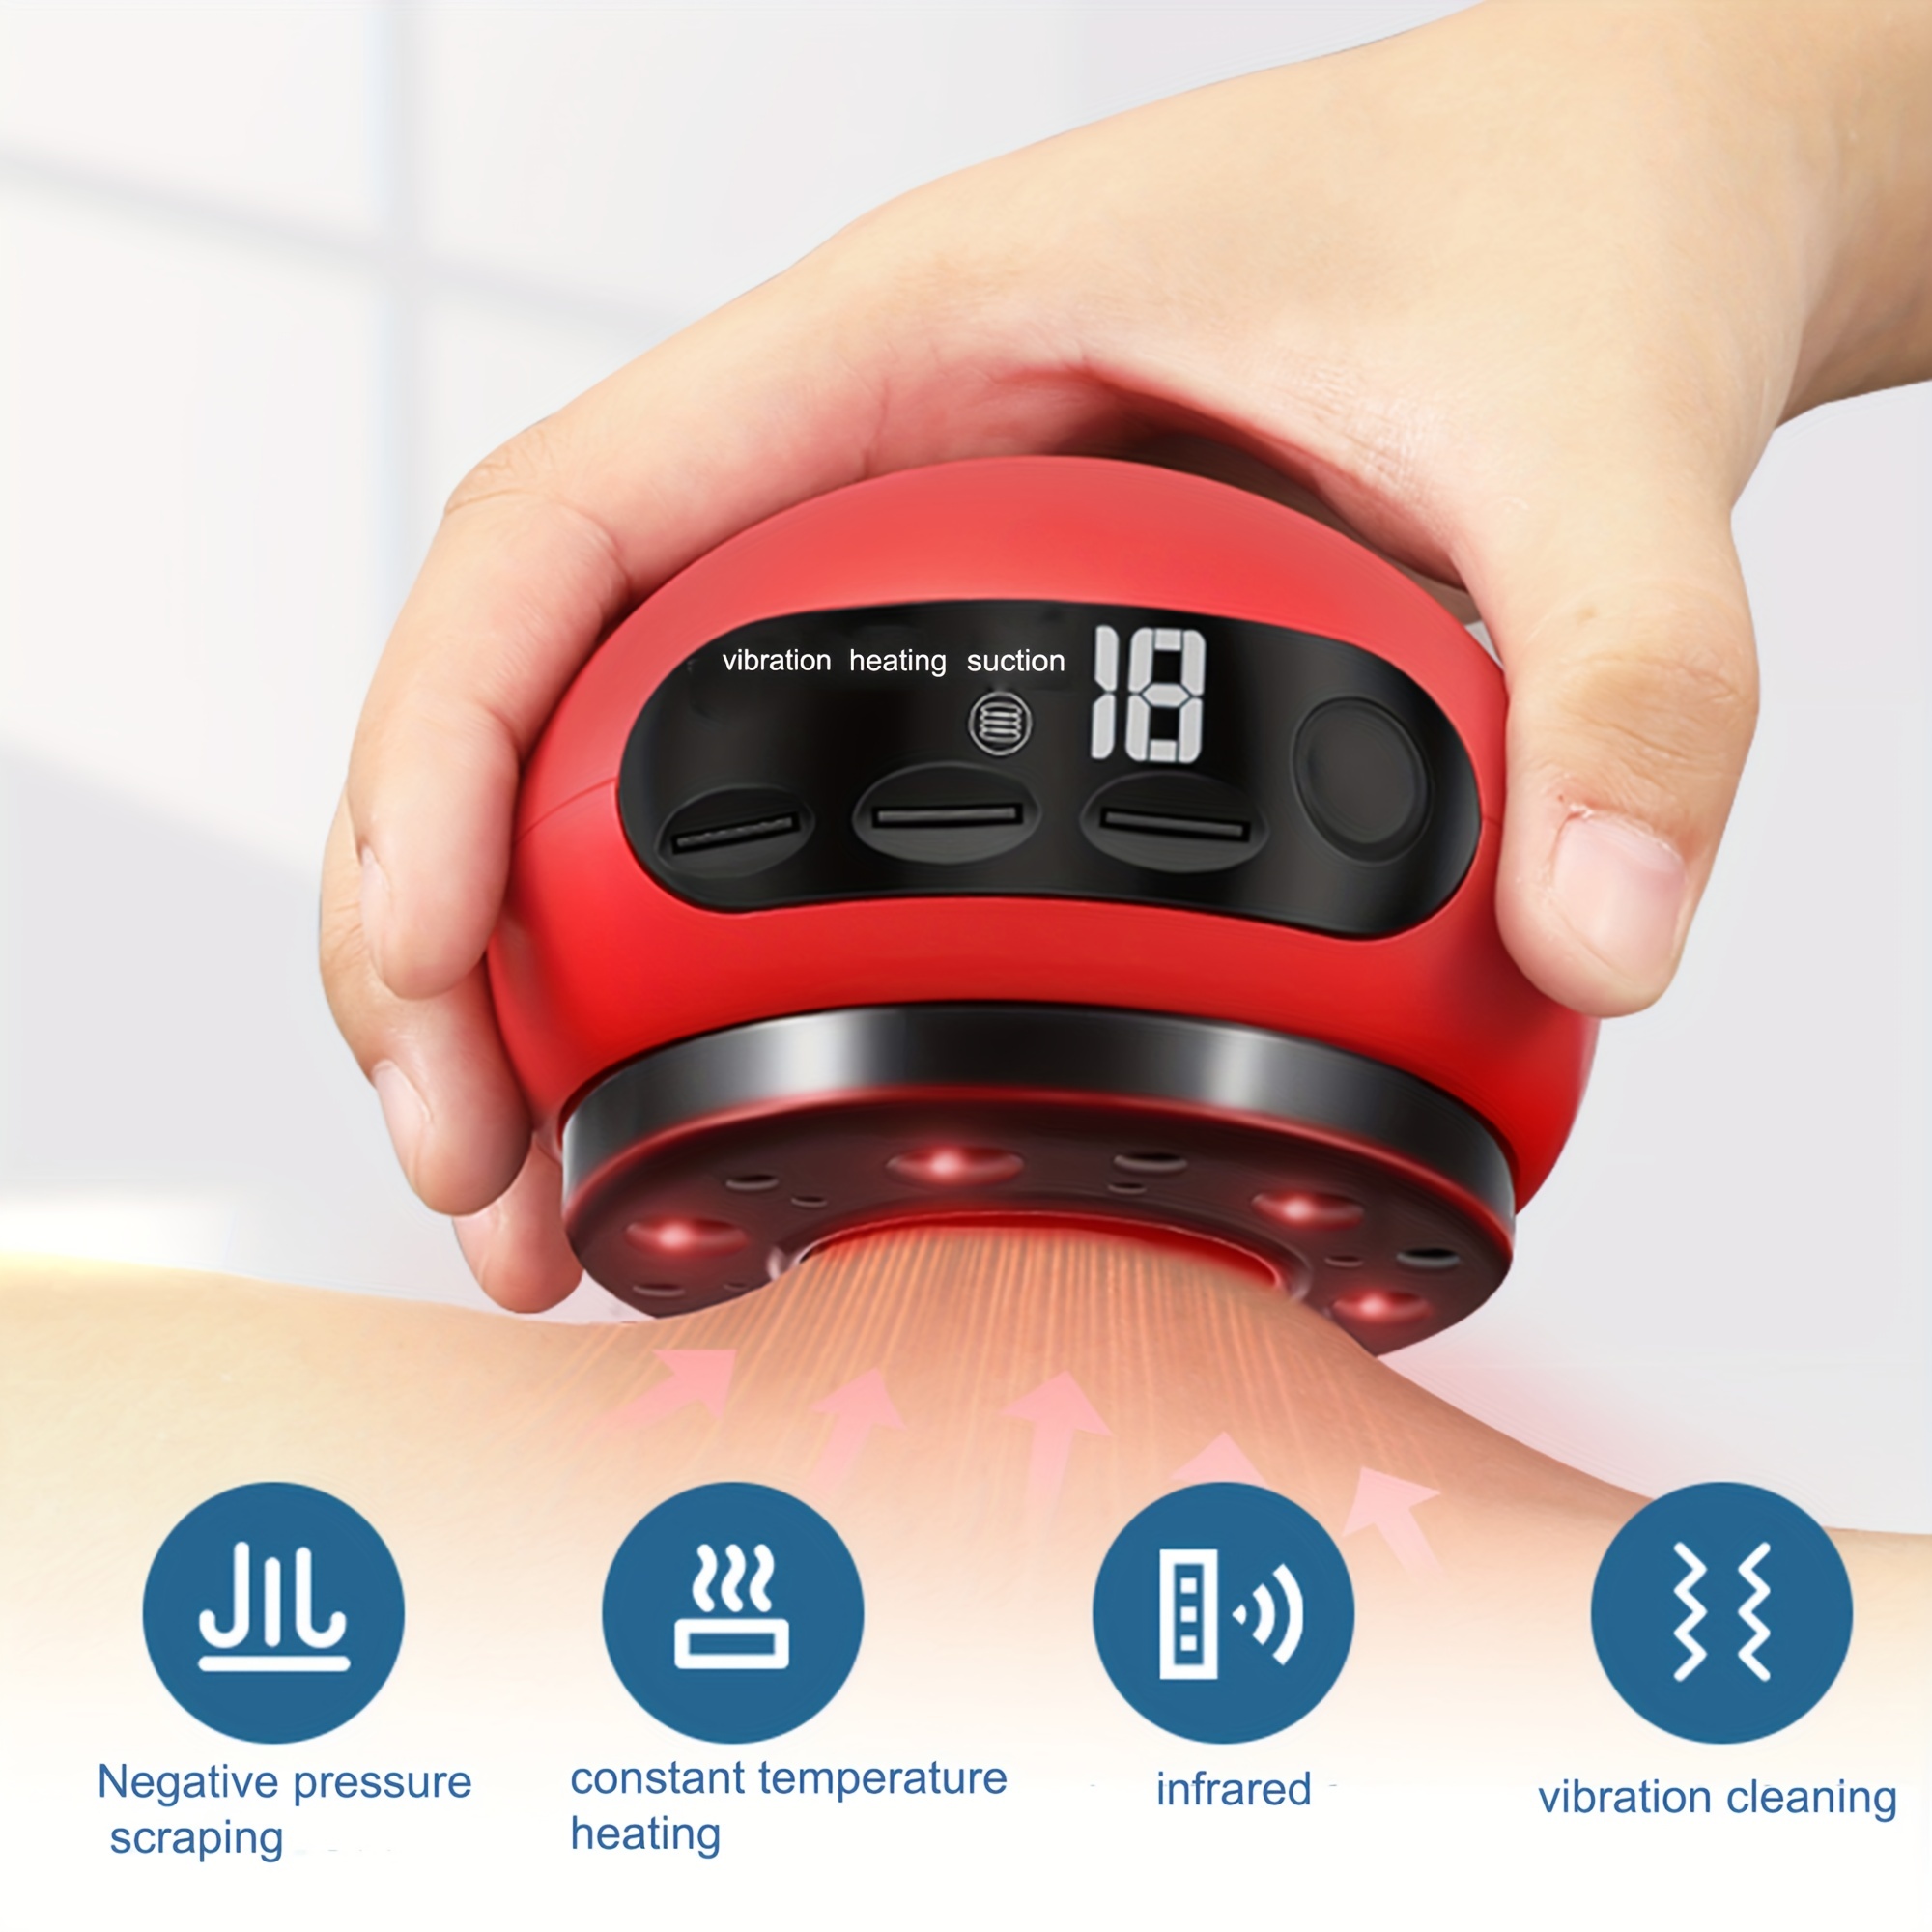 Rechargeable Neck Massager for Neck Pain,Intelligent Portable Neck Massager  with Heat Function,USB Charging Neck Relax Massager,,Massage at  Home,Outdoor,for Women and Men 2024 - $16.99